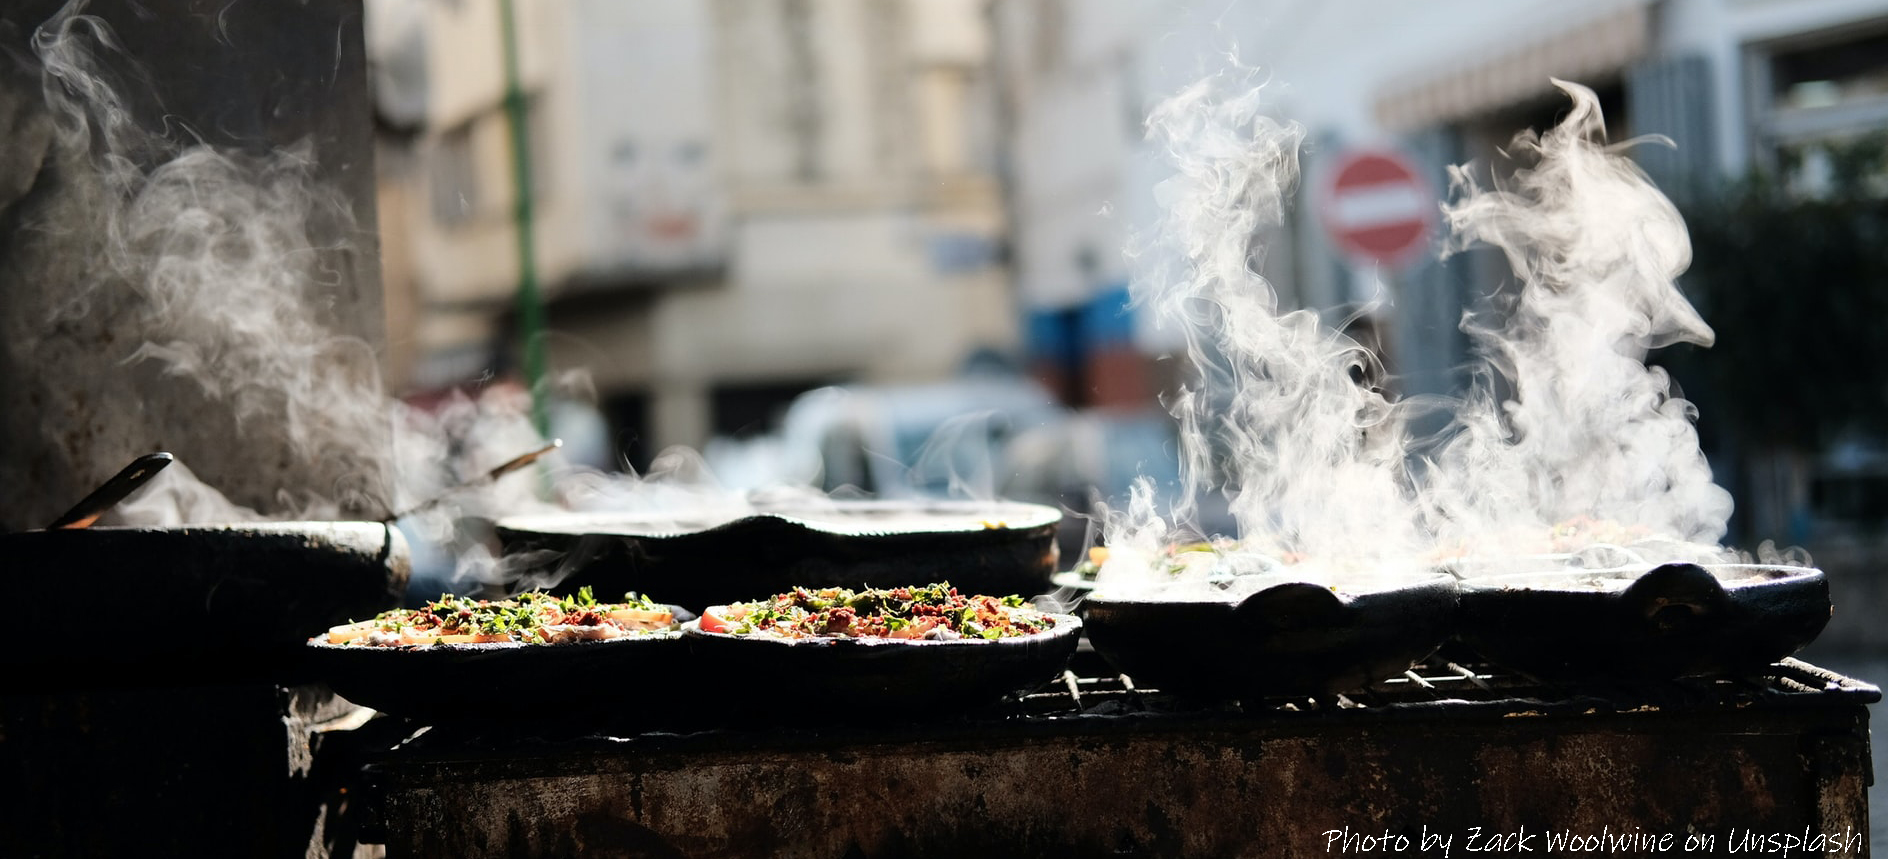 cooking in Morocco, tagines at a street market